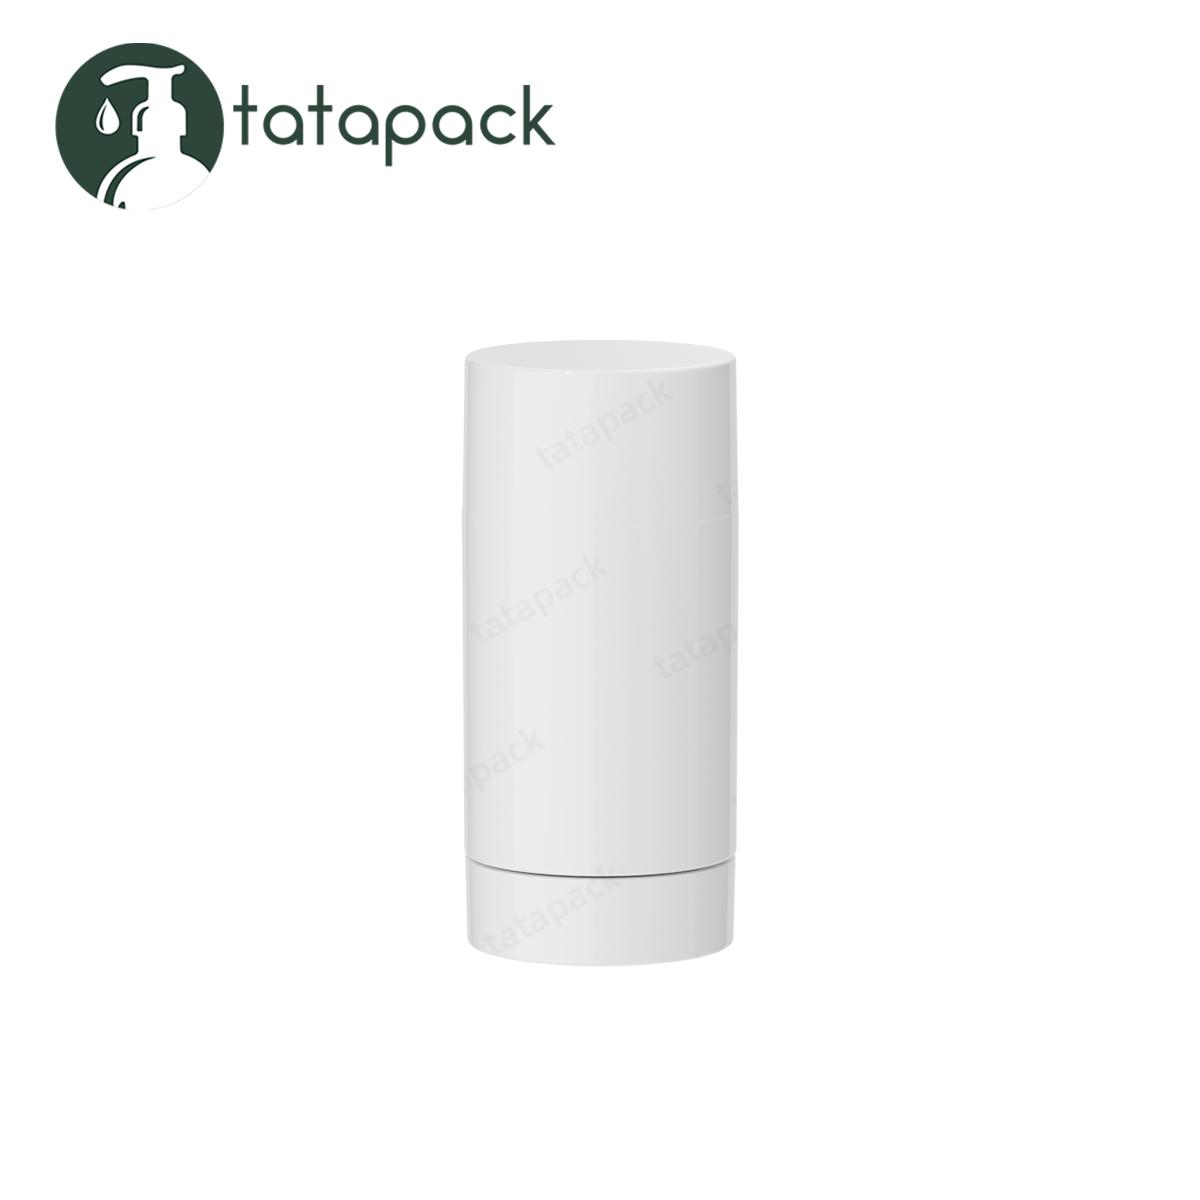 Product Plastic Glossy White 30g Deodorant Container for Deodorizing Cream, Empty 30ml Twist up Deodorant Tube for Cosmetic Blush Sticks - Tatapack Cosmetic Packaging image